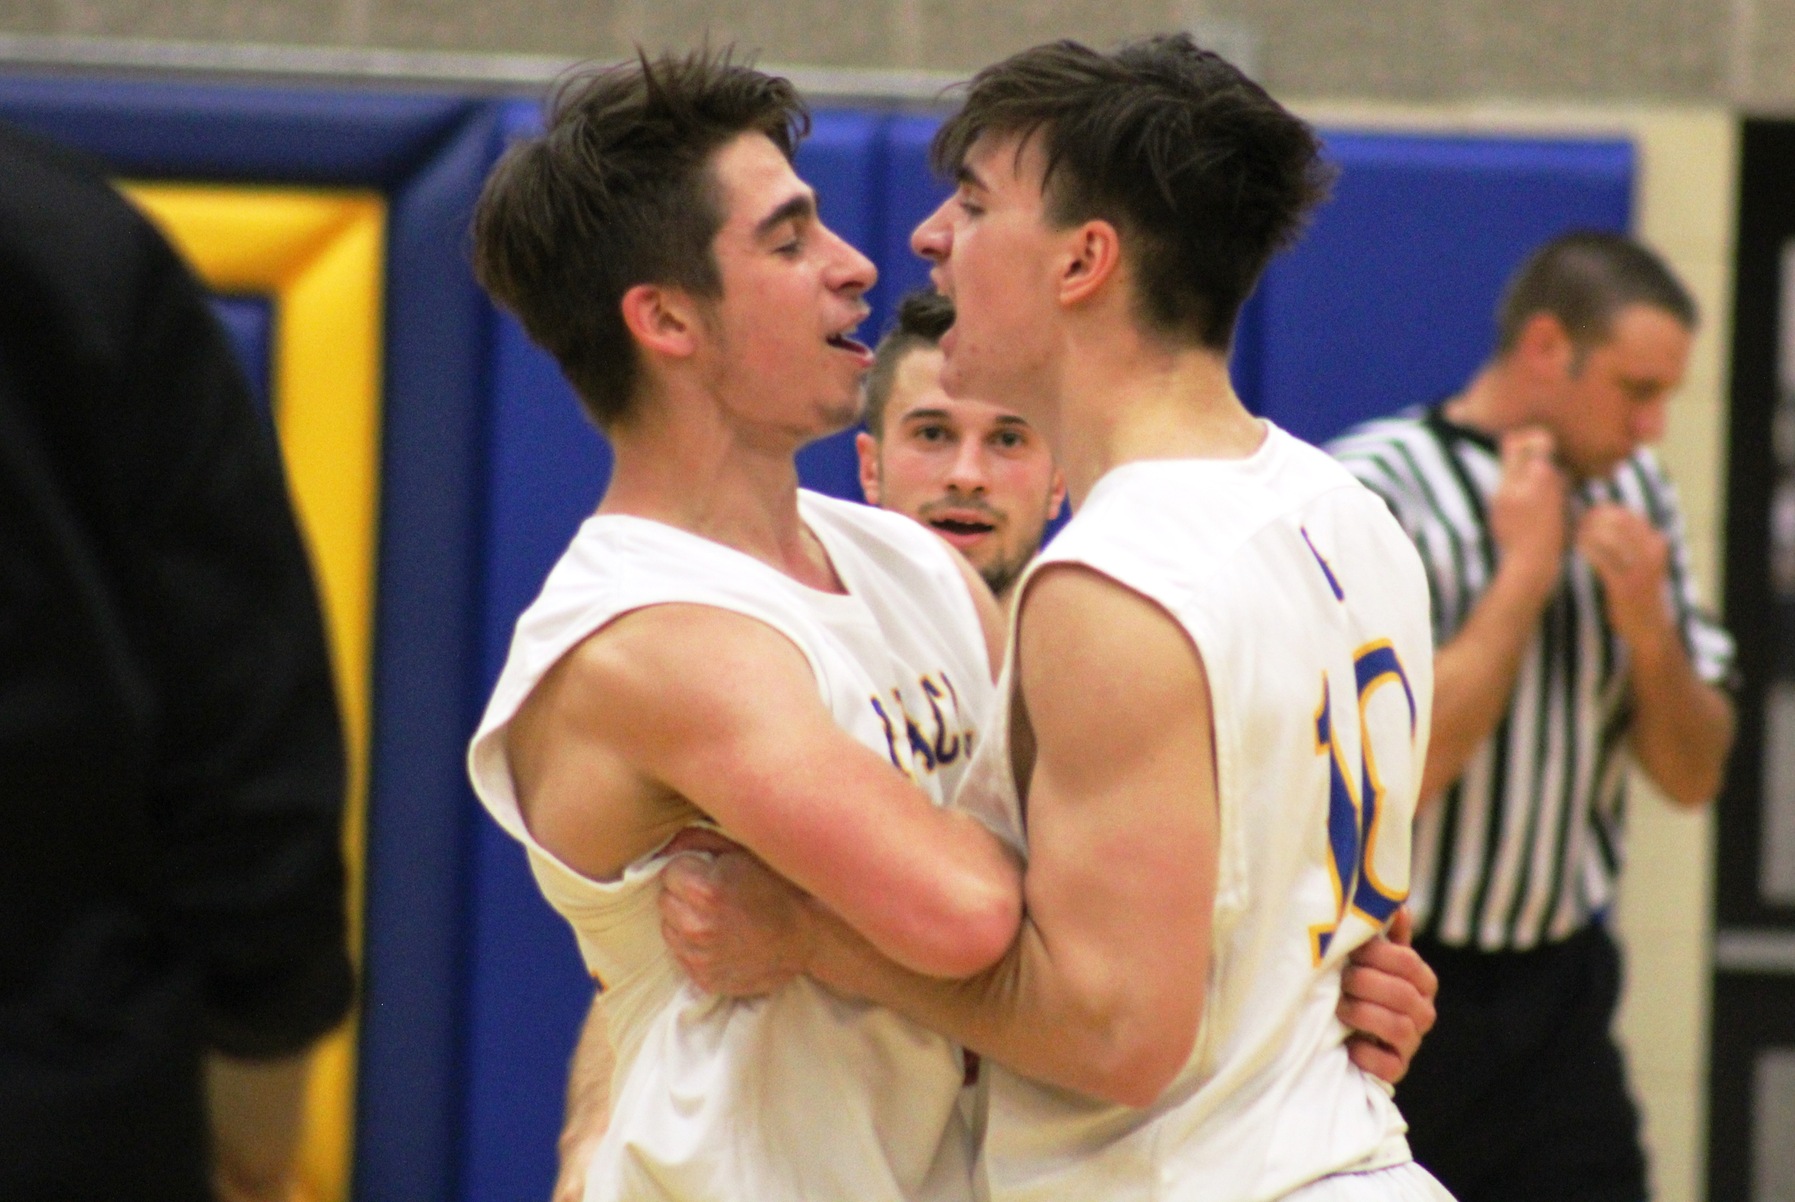 Brad Rathjen (right) and Nick Wurm celebrate after Wednesday's 64-63 victory over DCTC. Rathjen hit the game-winner with a driving layup with about 10 seconds left in the game.